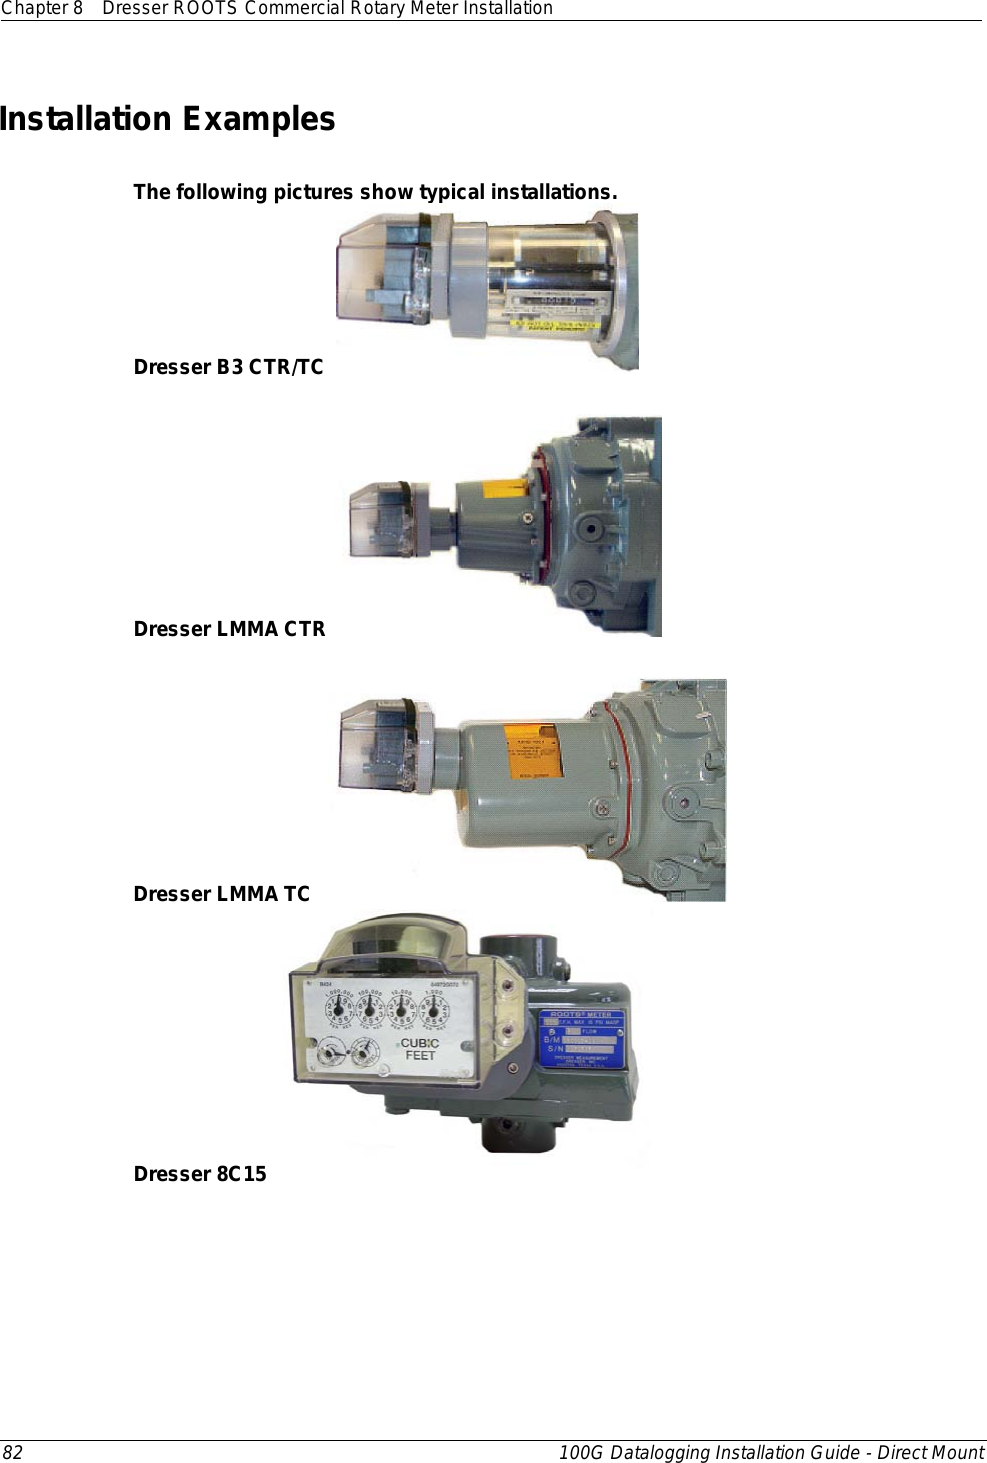 Chapter 8 Dresser ROOTS Commercial Rotary Meter Installation  82 100G Datalogging Installation Guide - Direct Mount  Installation Examples  The following pictures show typical installations. Dresser B3 CTR/TC     Dresser LMMA CTR   Dresser LMMA TC  Dresser 8C15     